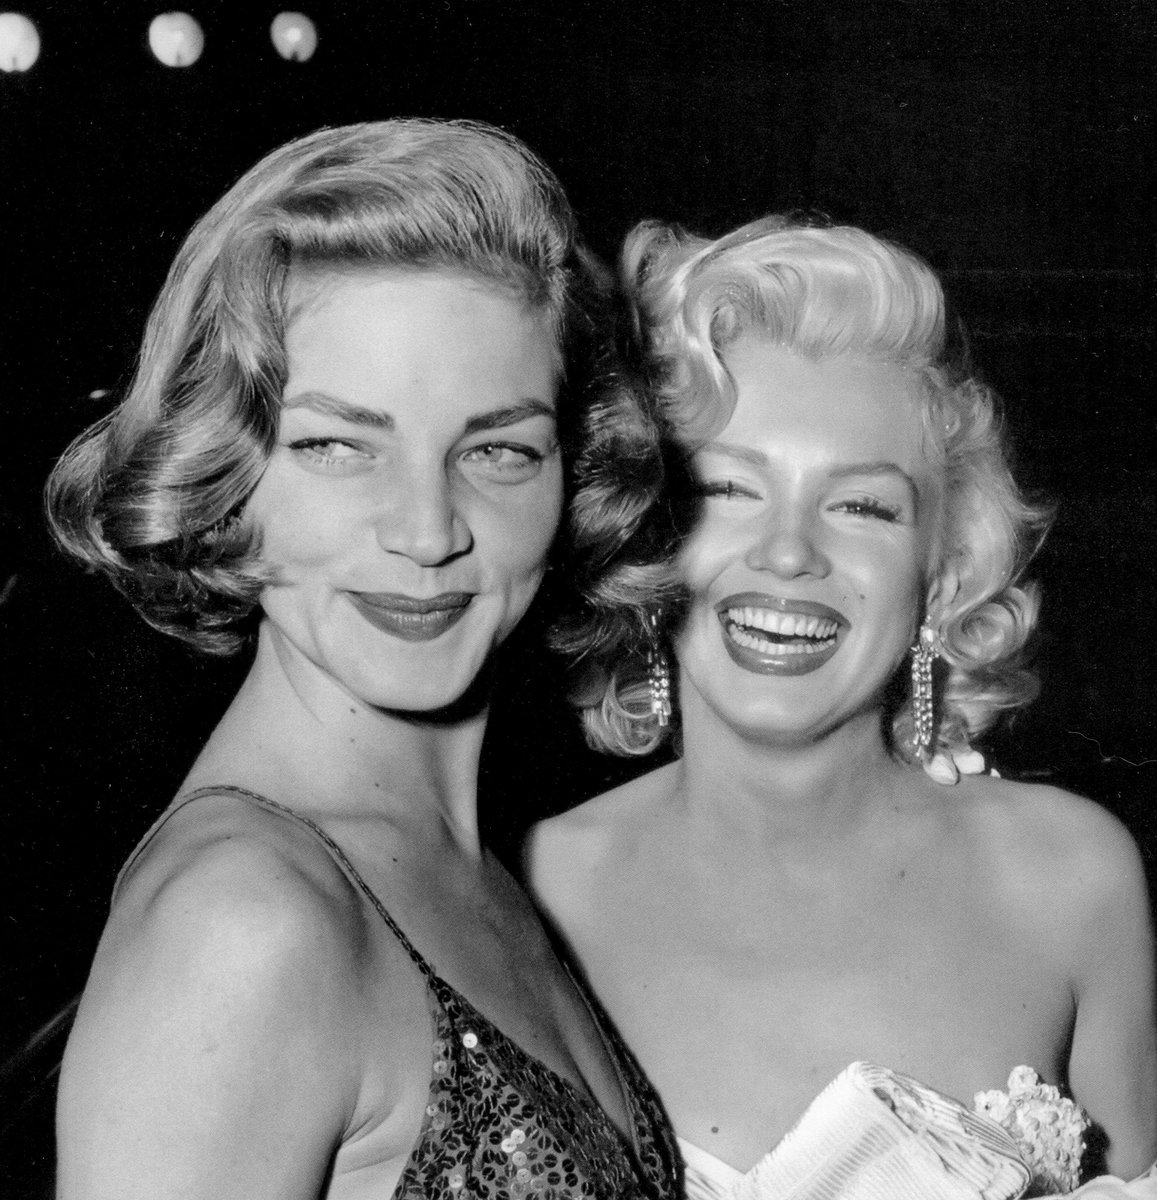 Seventy years ago today (4 November 1953) in show biz history: co-stars Lauren Bacall and Marilyn Monroe attended the premiere of their movie How to Marry a Millionaire in Los Angeles, California. (The film hit American cinemas on 5 November 1953). #laurenbacall #MarilynMonroe